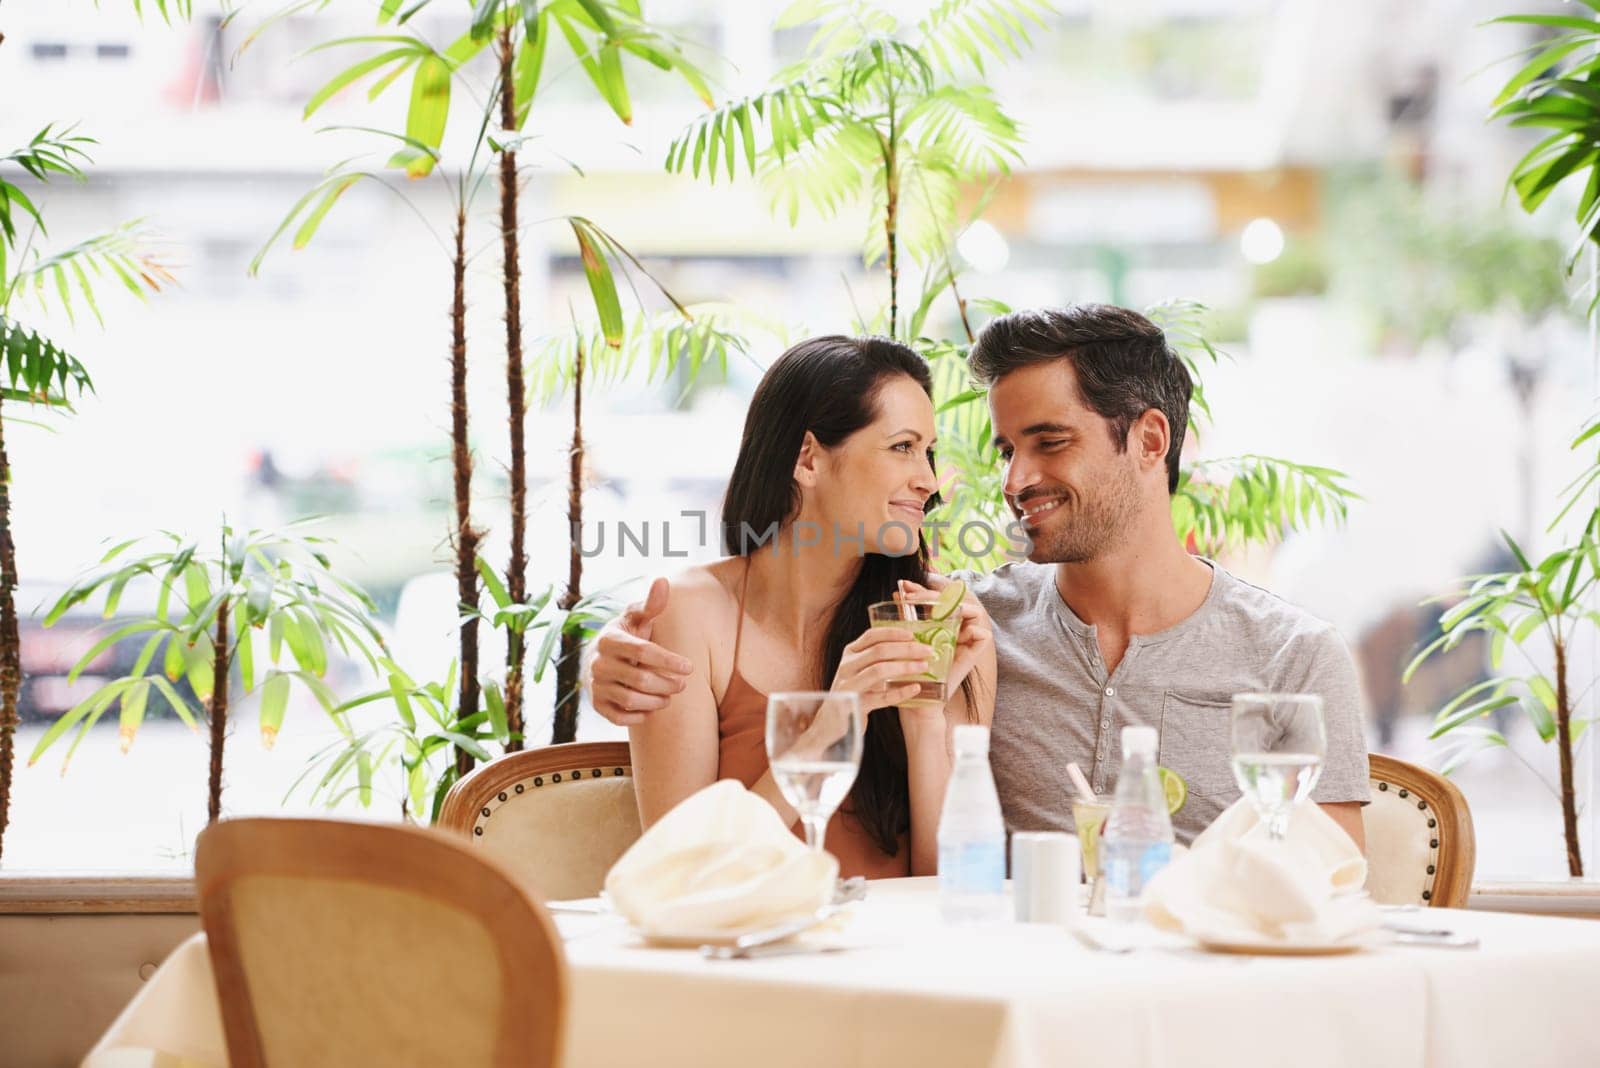 Couple, restaurant and drinks with lunch, love and romance for anniversary or celebration. Woman, man and date with luxury, fine dining and smile for relationship on holiday or vacation with meal.